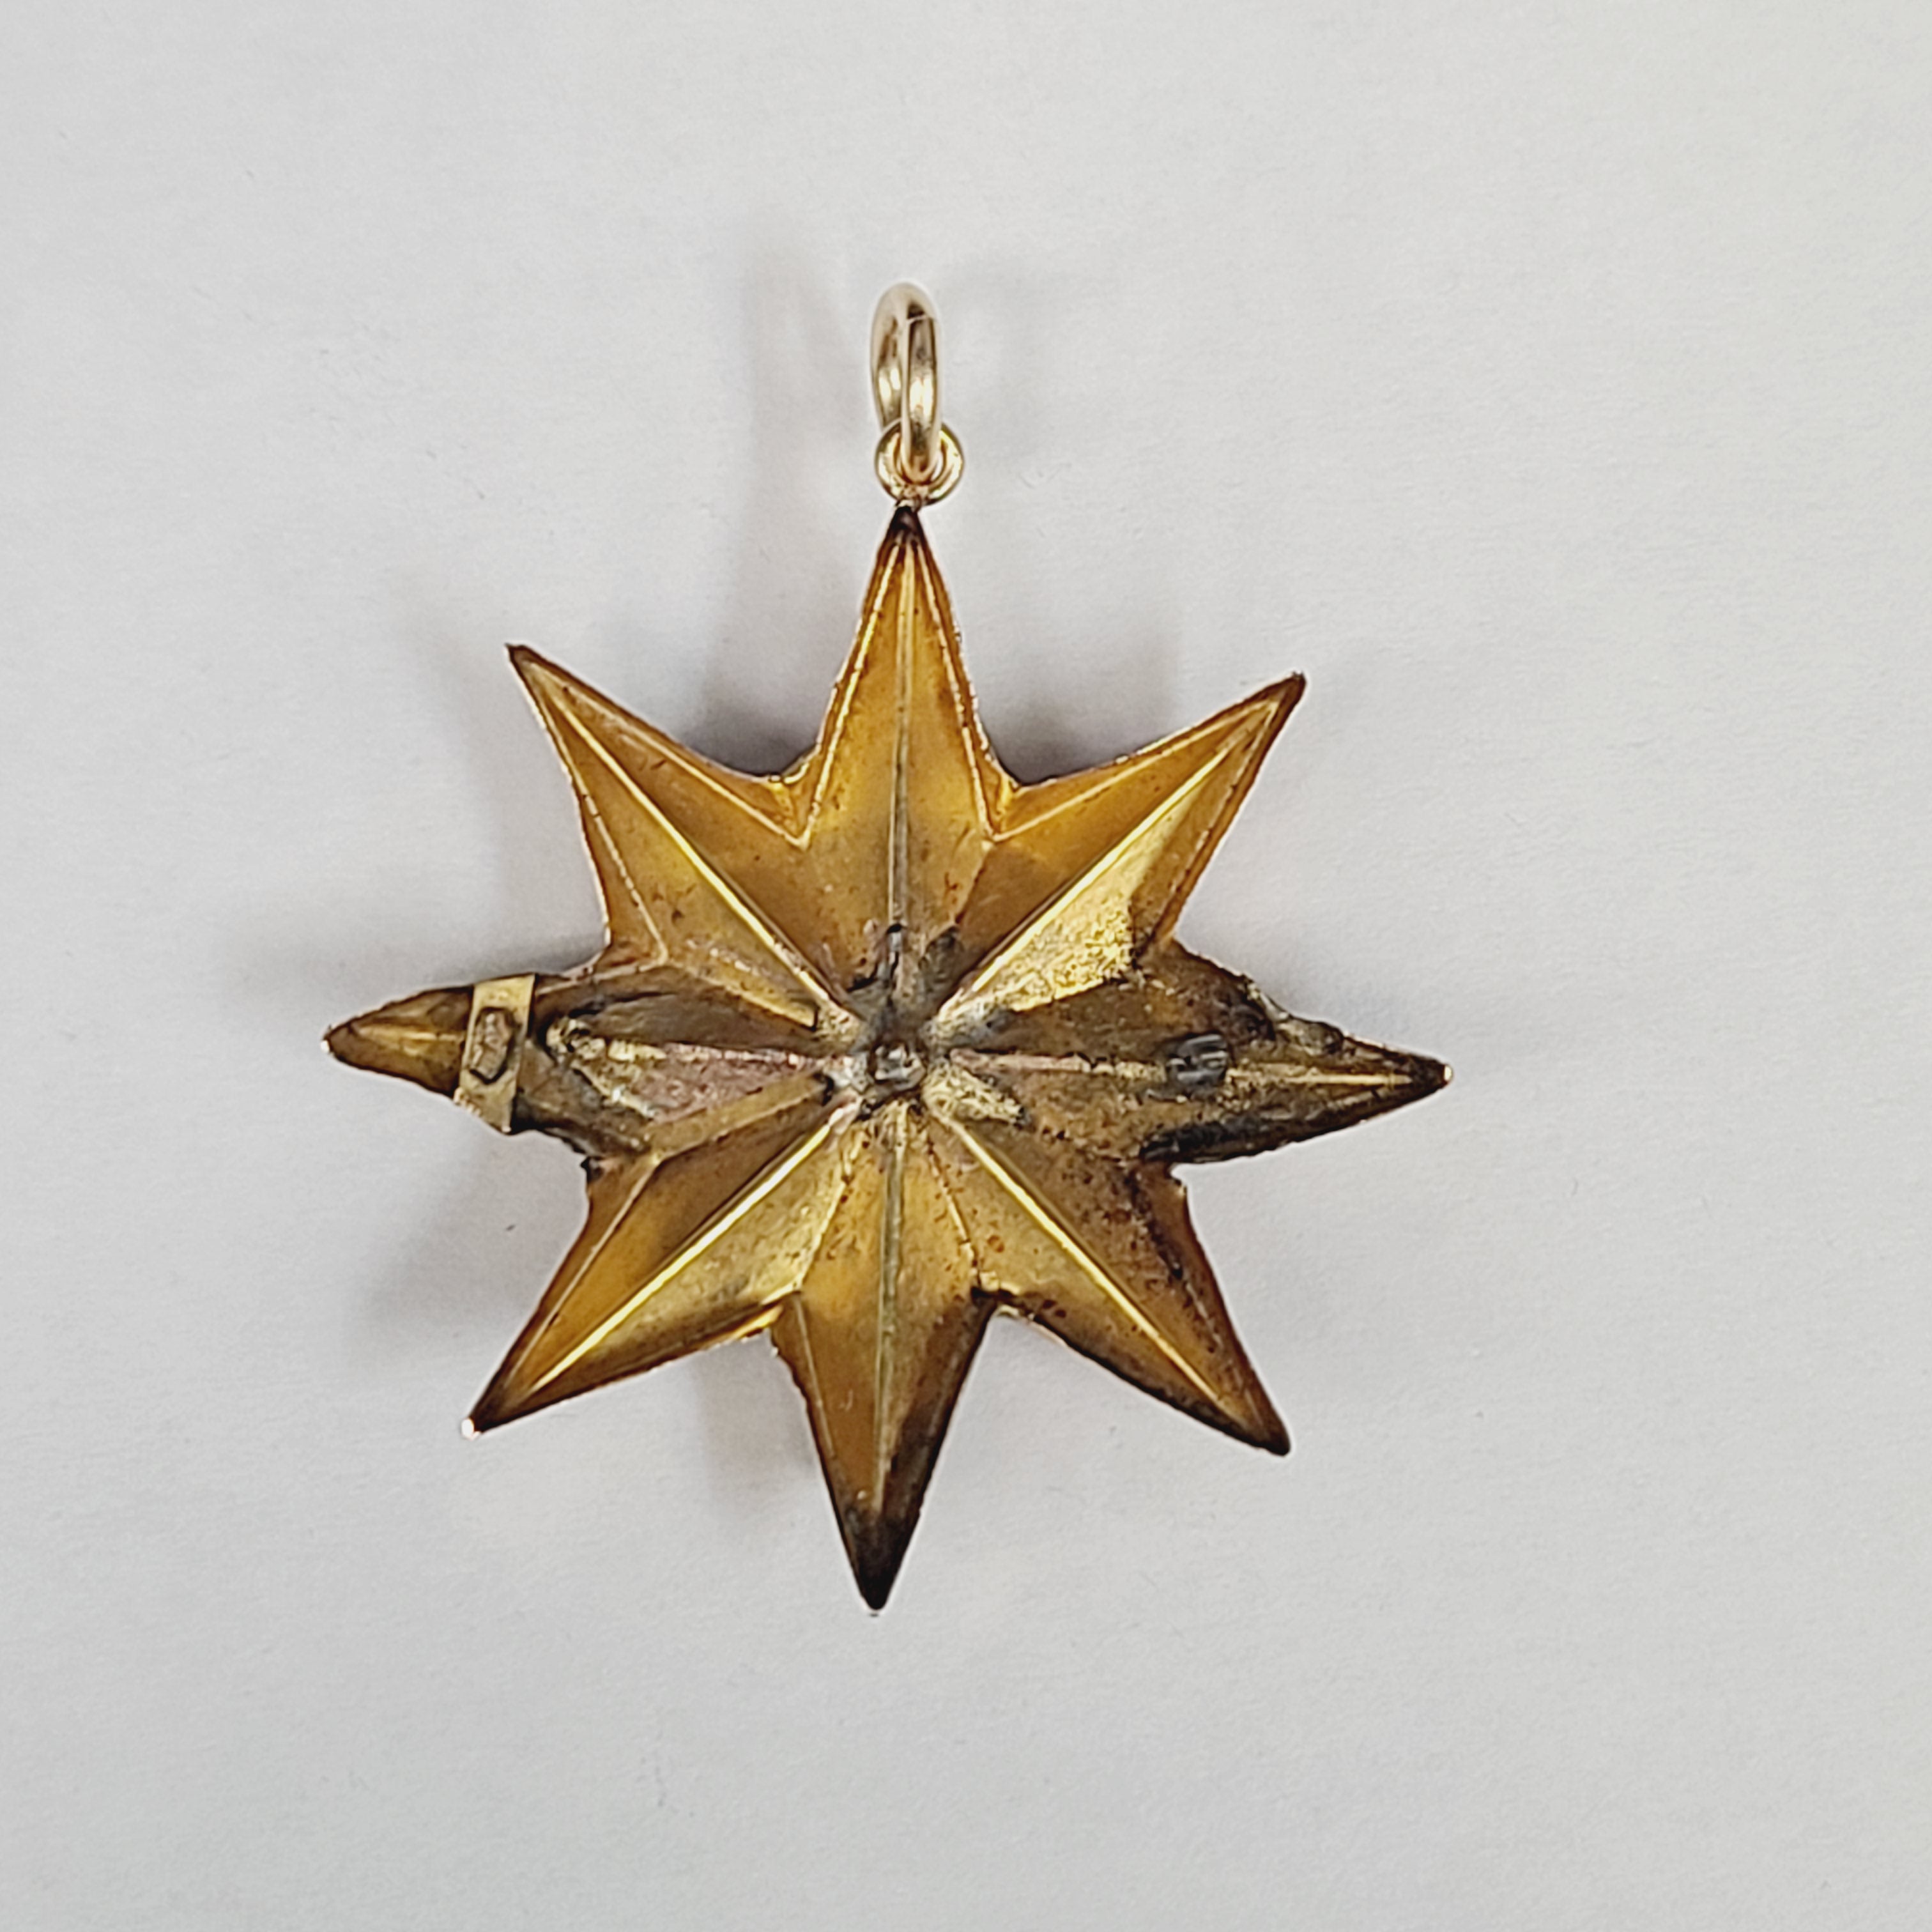 18K Gold Antique Enamel Portrait Star with Seed Pearls